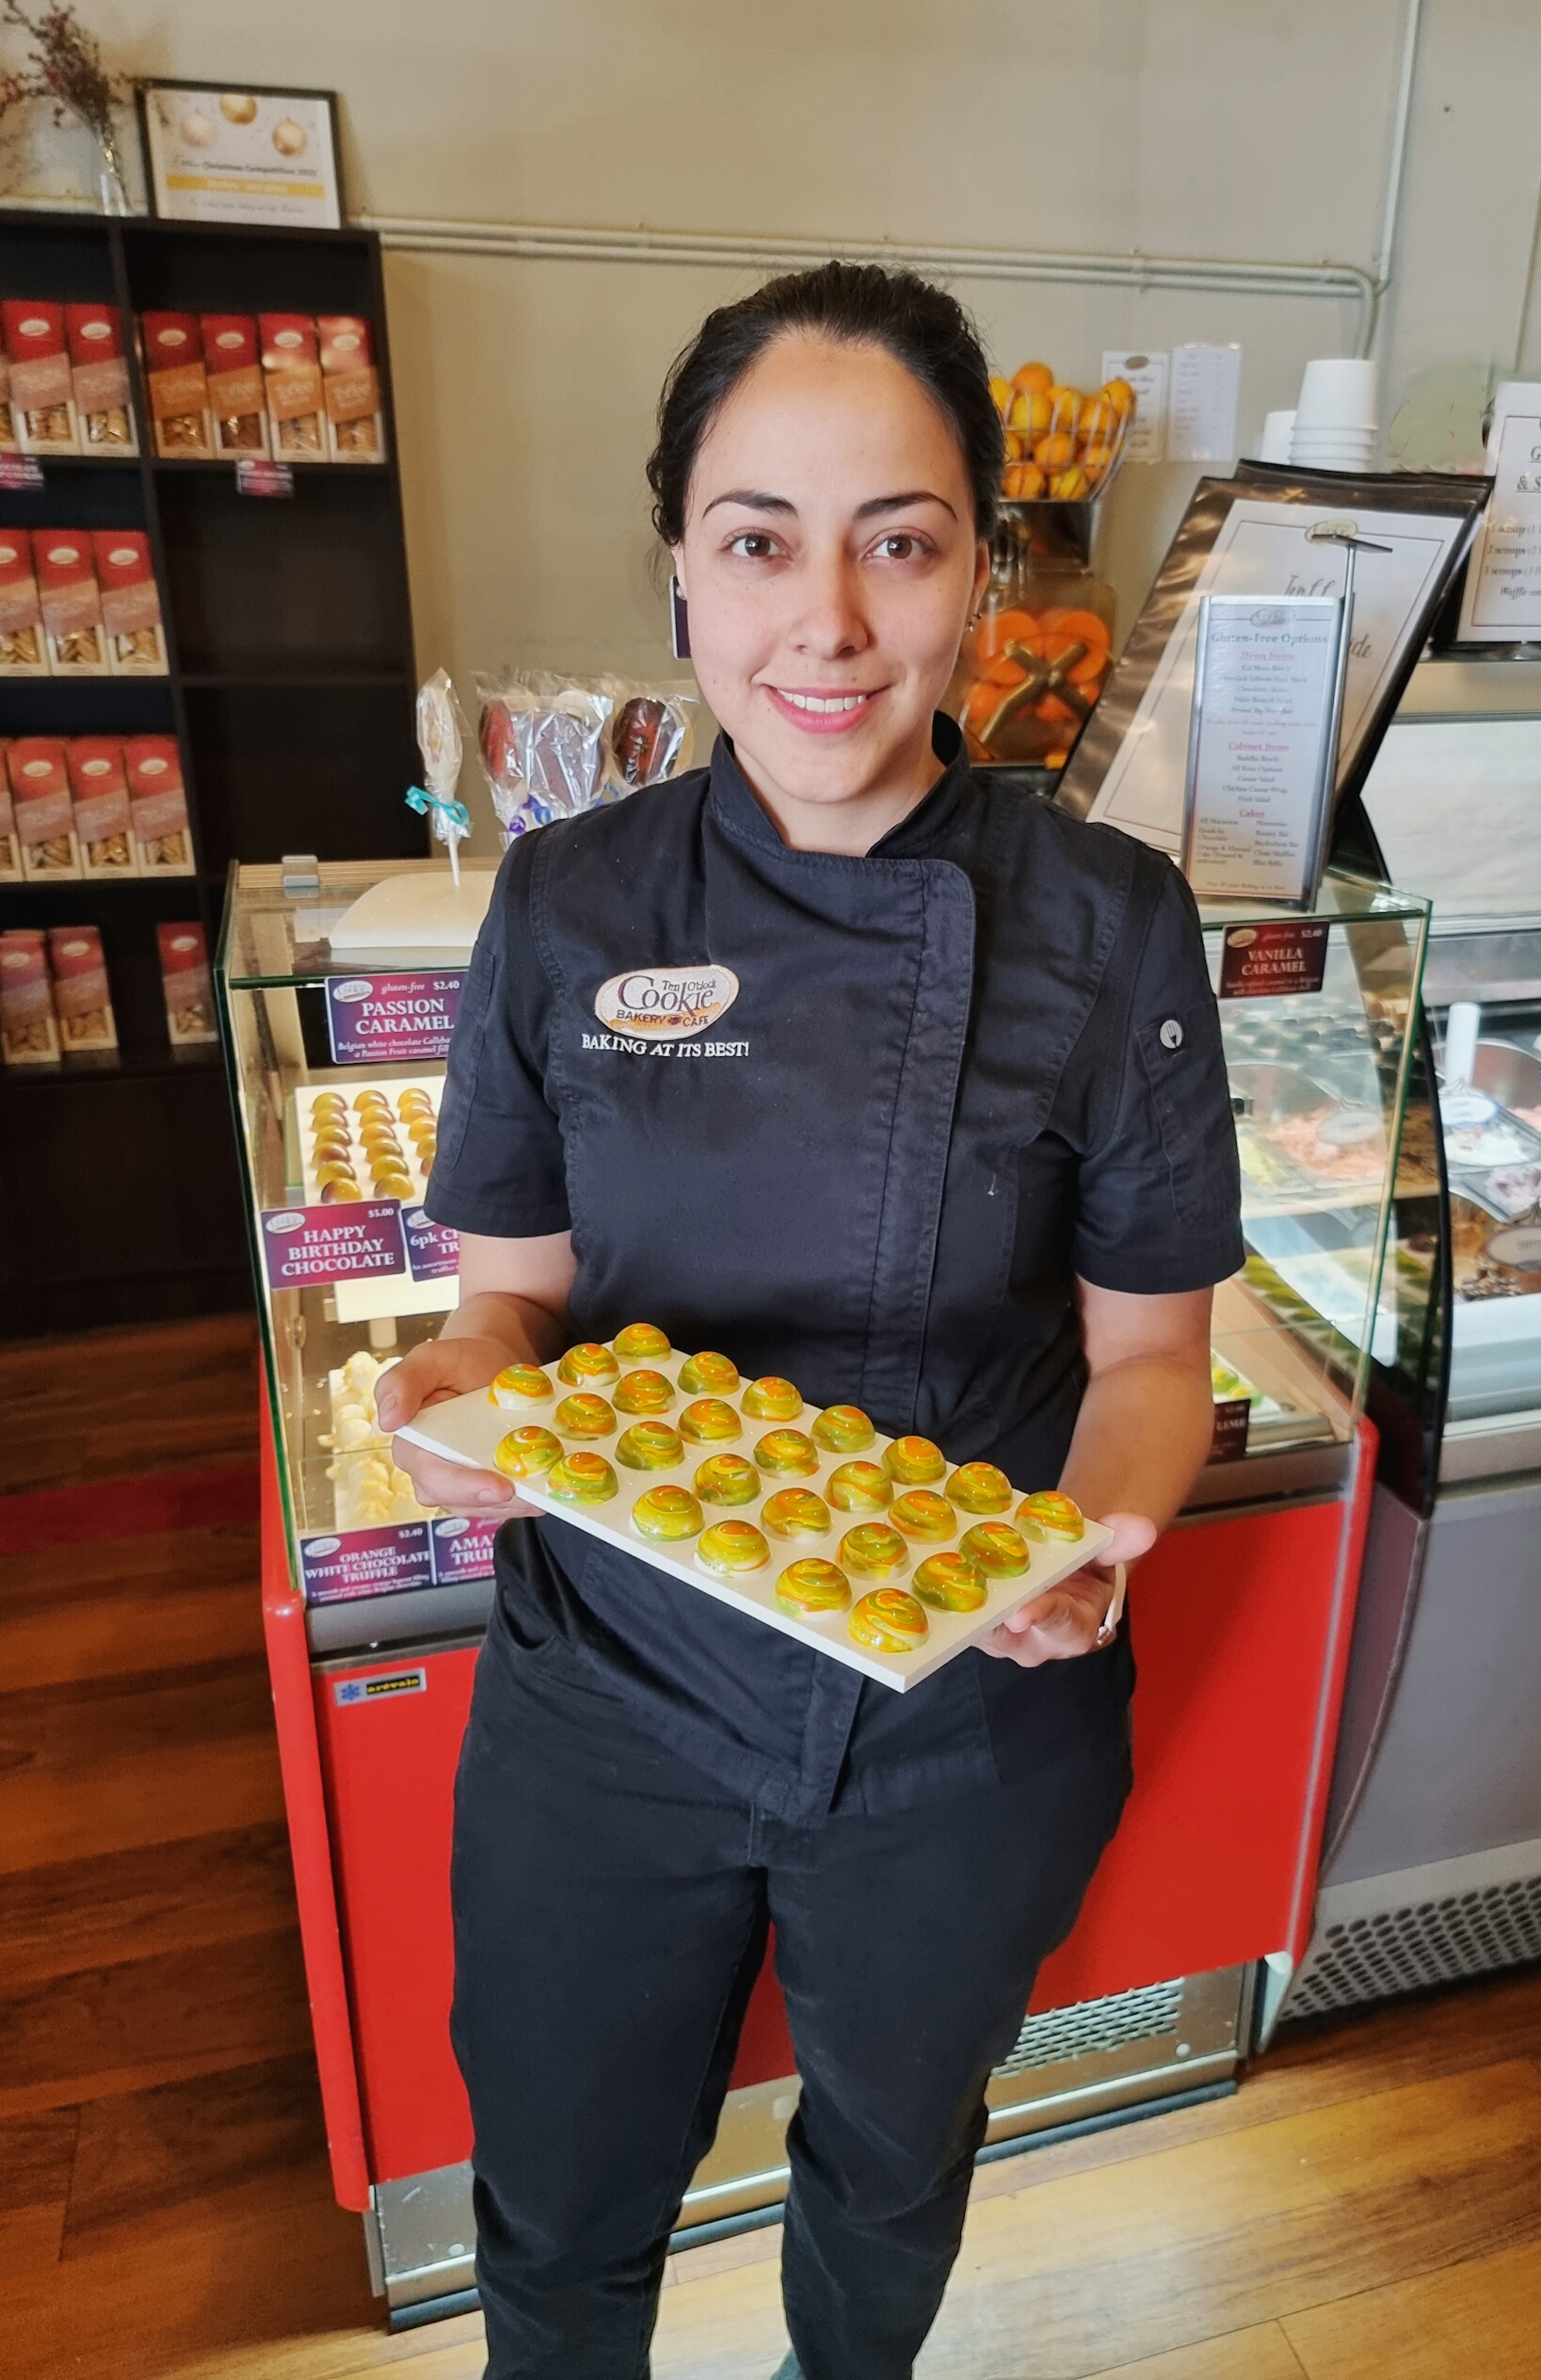 female baker chef standing in uniform holding a tray of sweets, smiling